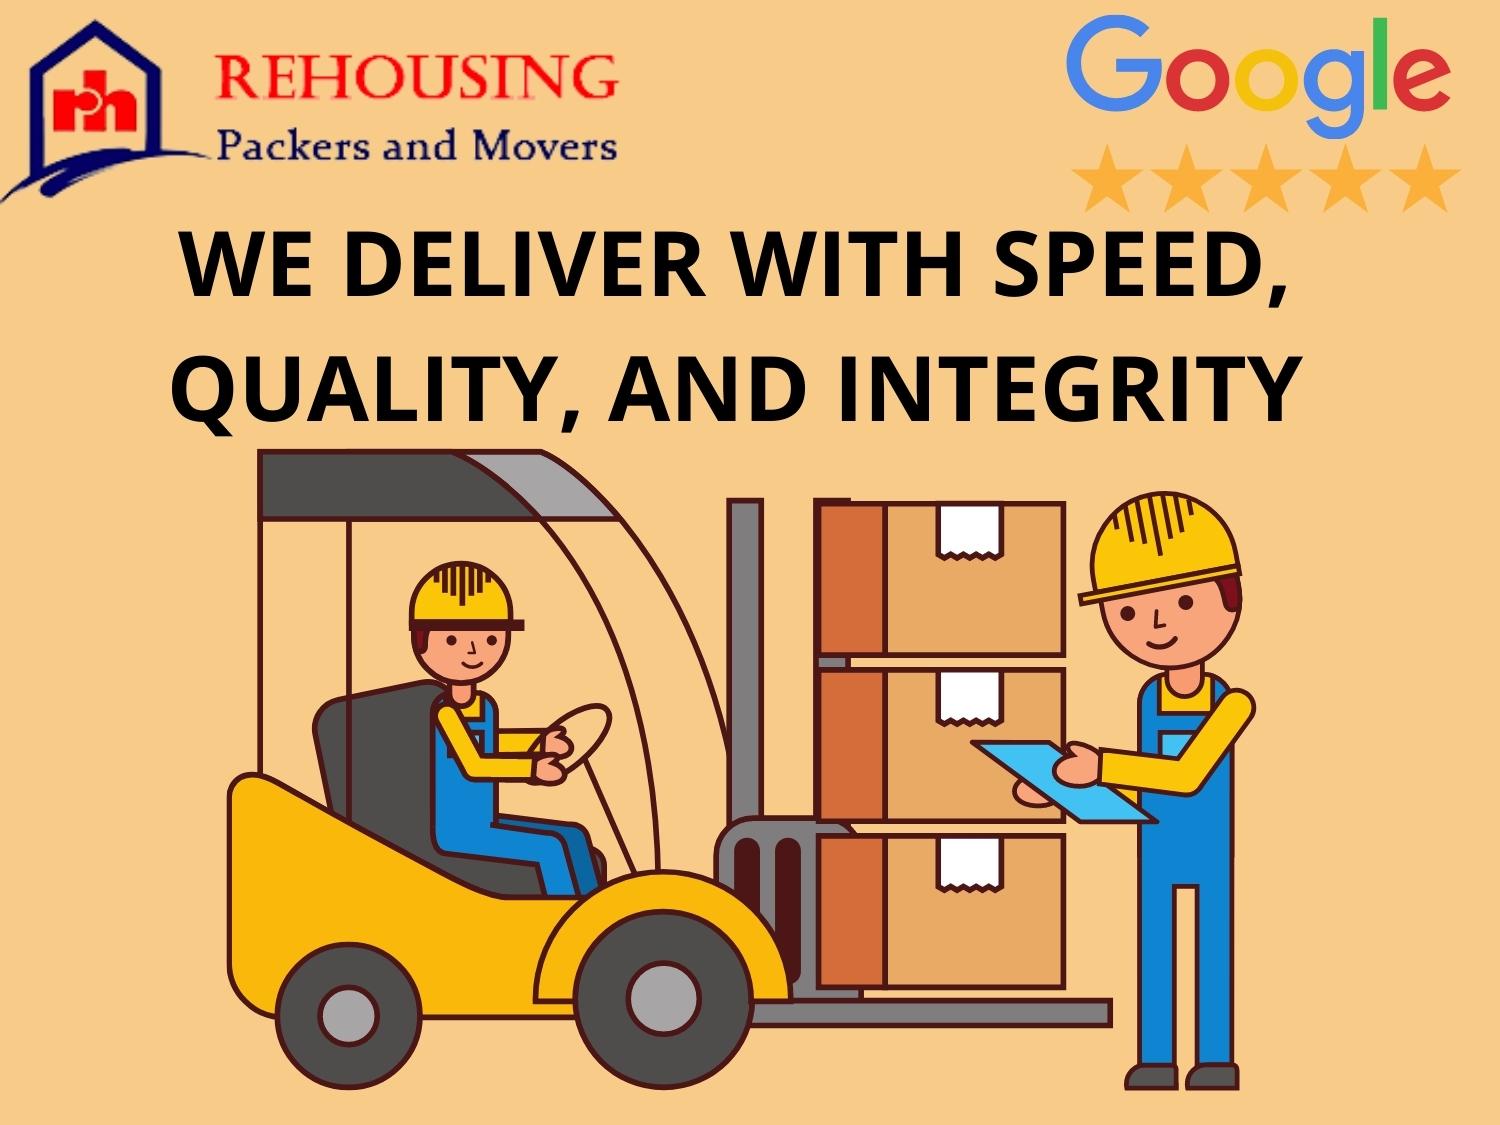 Courier services from Surat to Jamshedpur is dependable and secure, but they do not meet your desire for immediate delivery